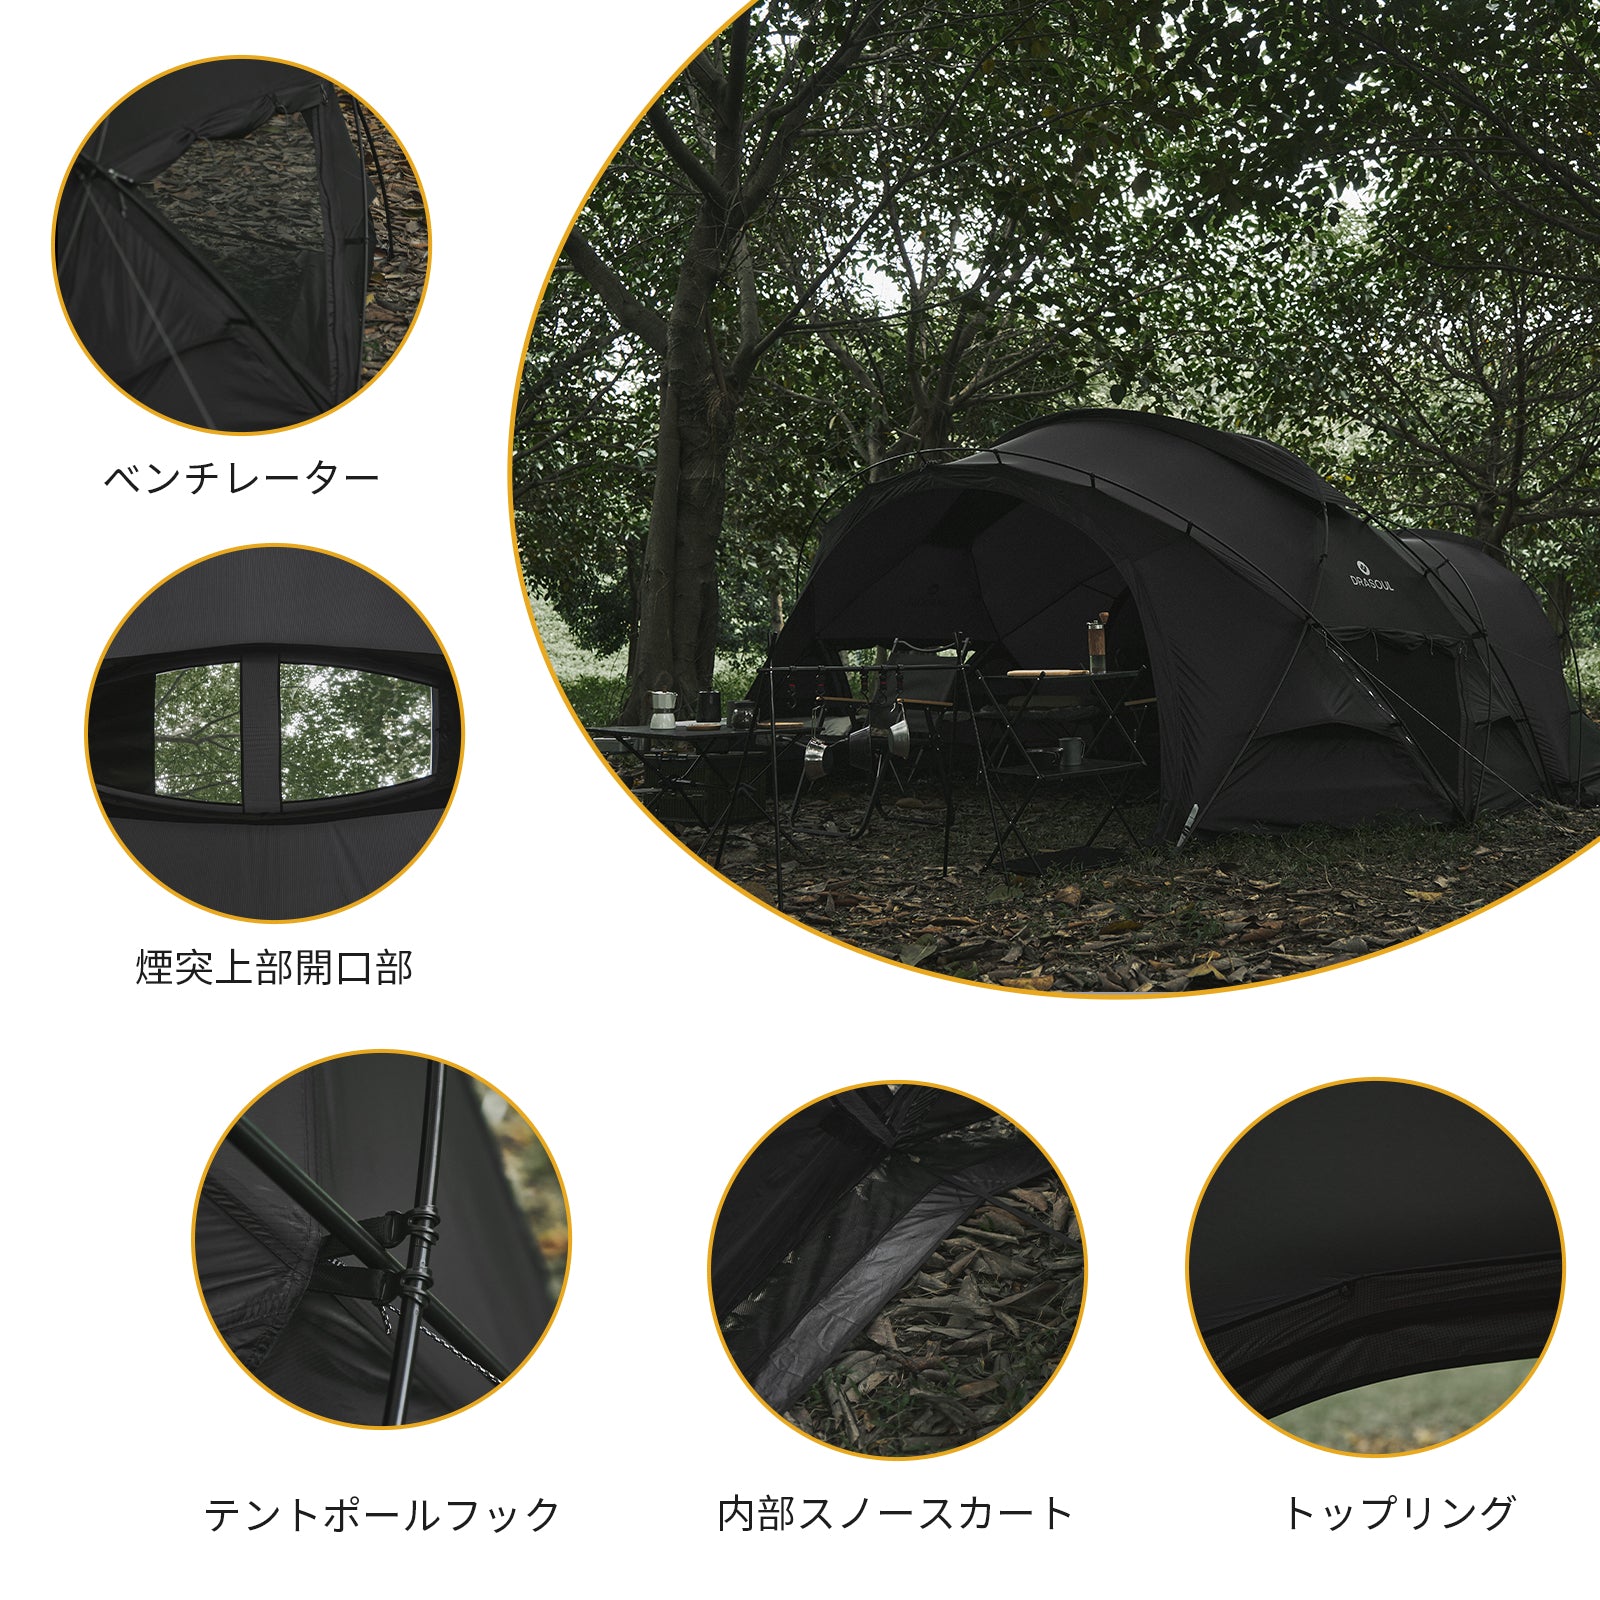 Drasoul——Camping and outdoor travel options